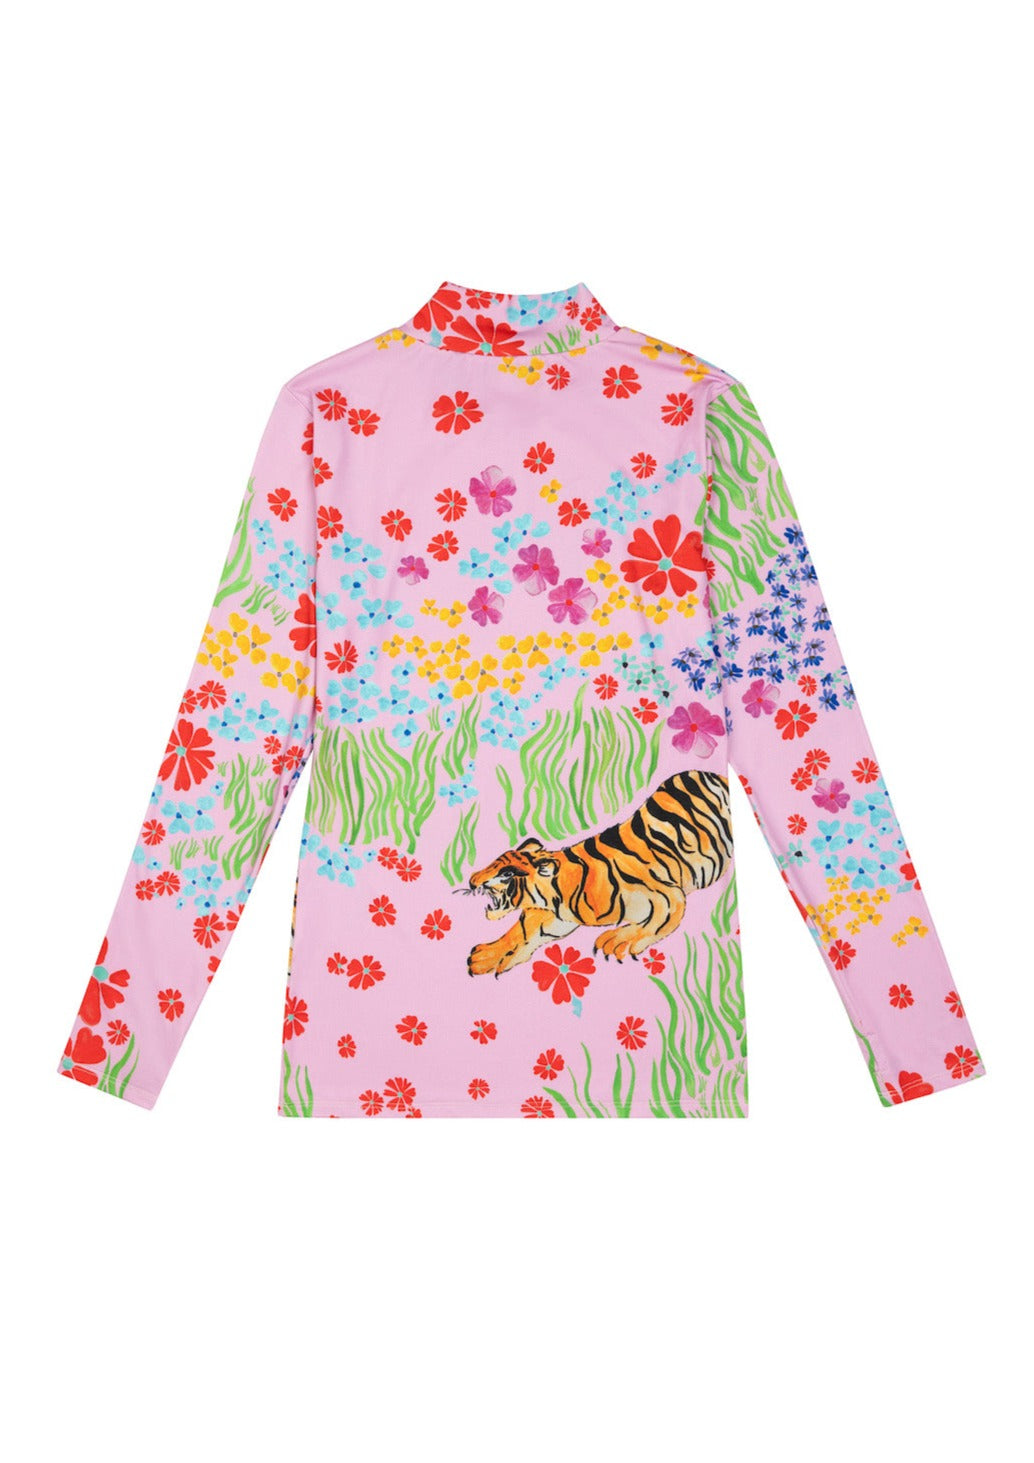 Our signature body-hugging turtleneck in our Tiger Blooms print on pink base fabric, hand-illustrated by designer Olivia Cheng.